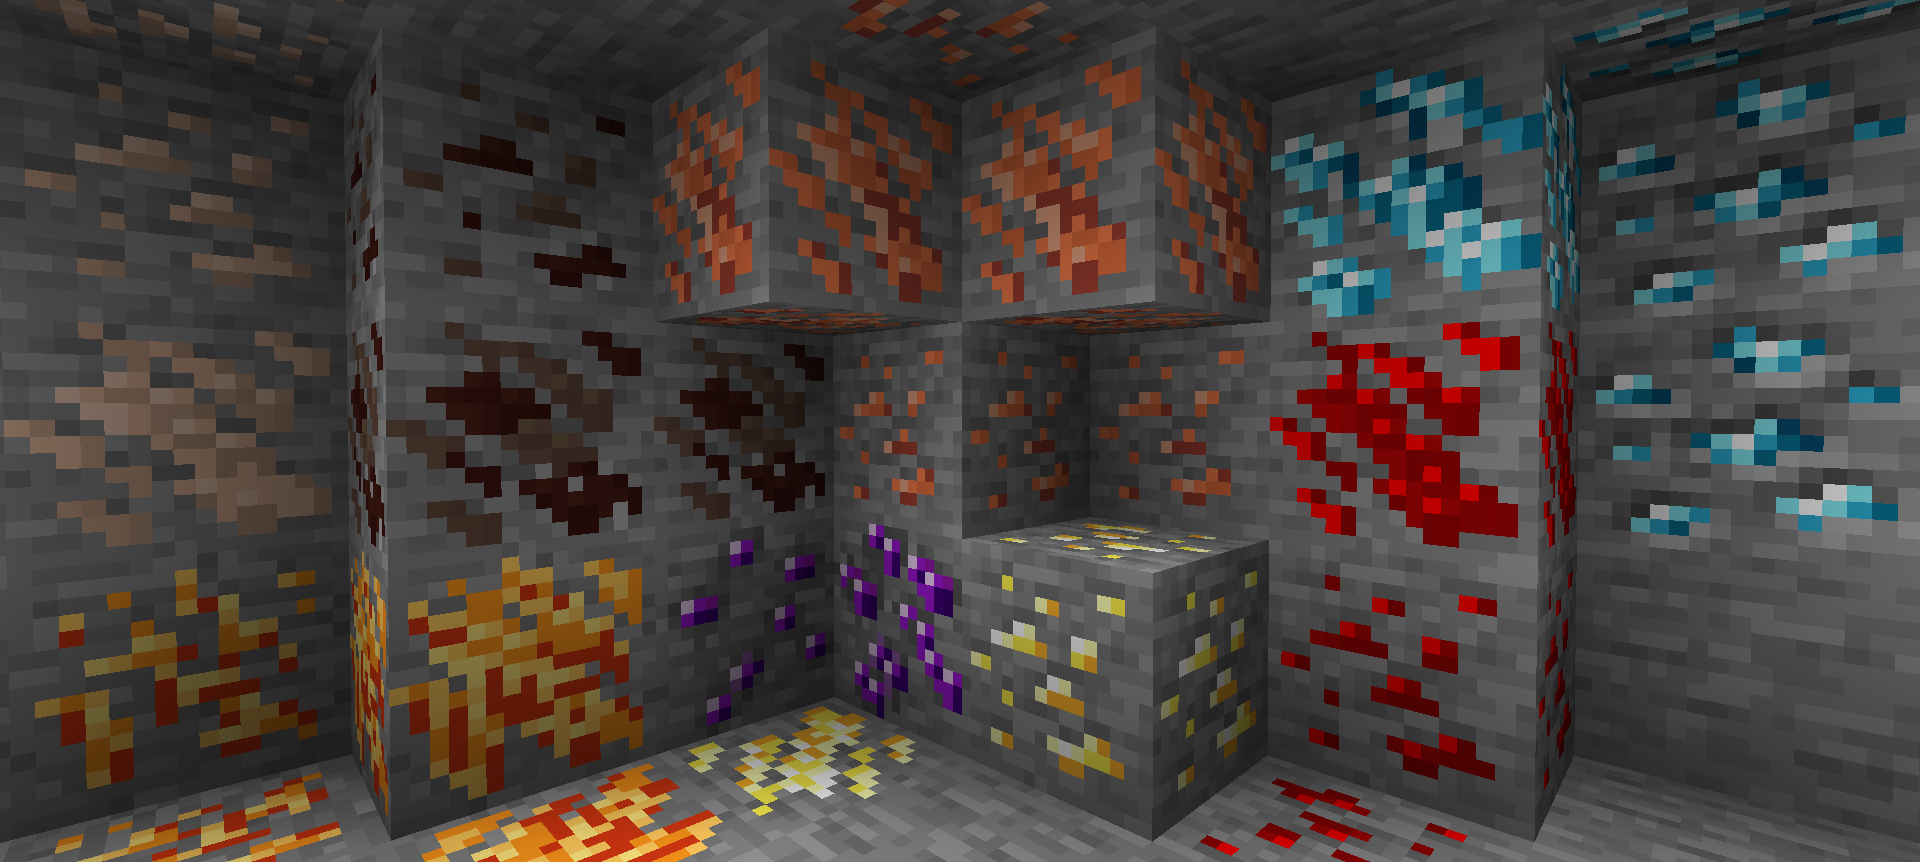 Compact Ores Mods Minecraft CurseForge. 